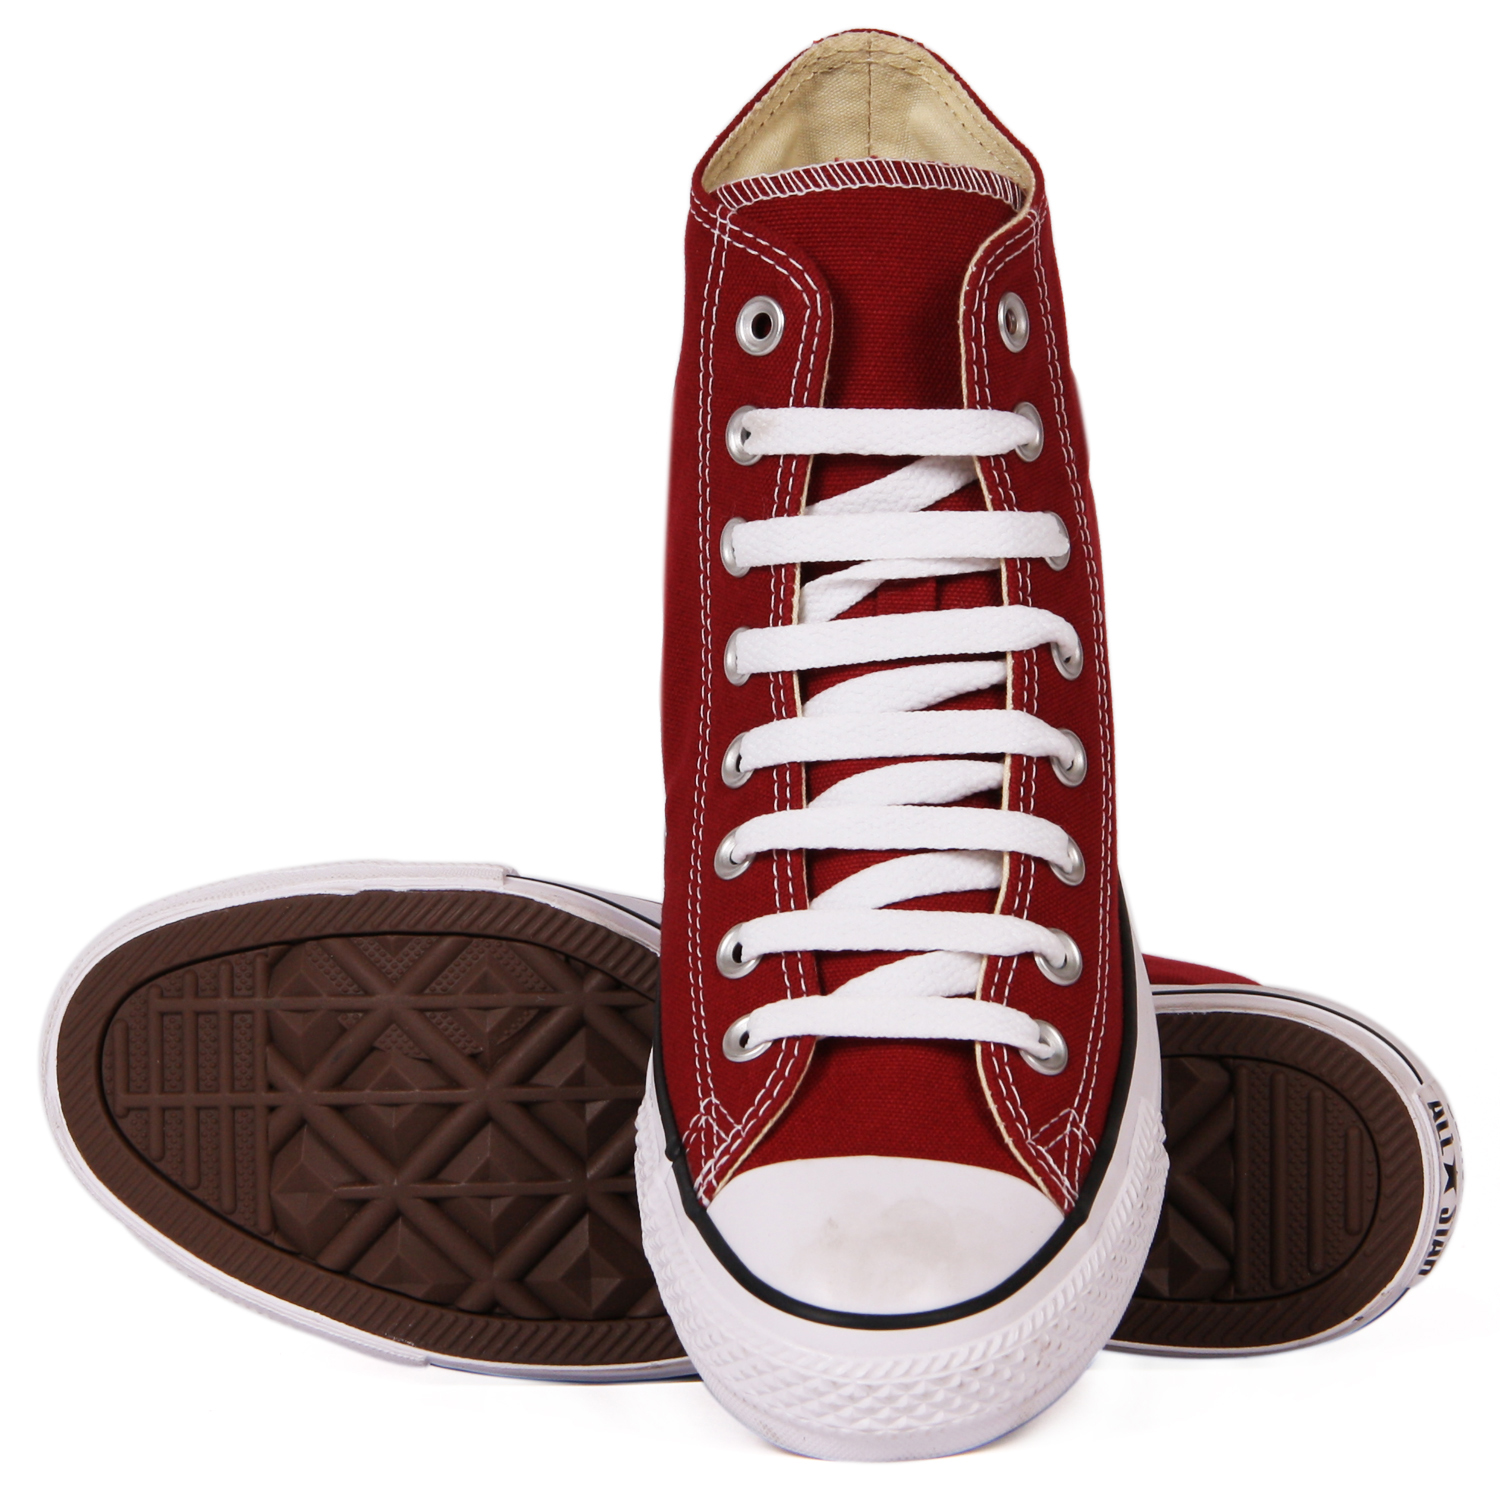 Buy Converse Men's Maroon Lace-up Sneaker Shoes Online @ ₹2599 from ...